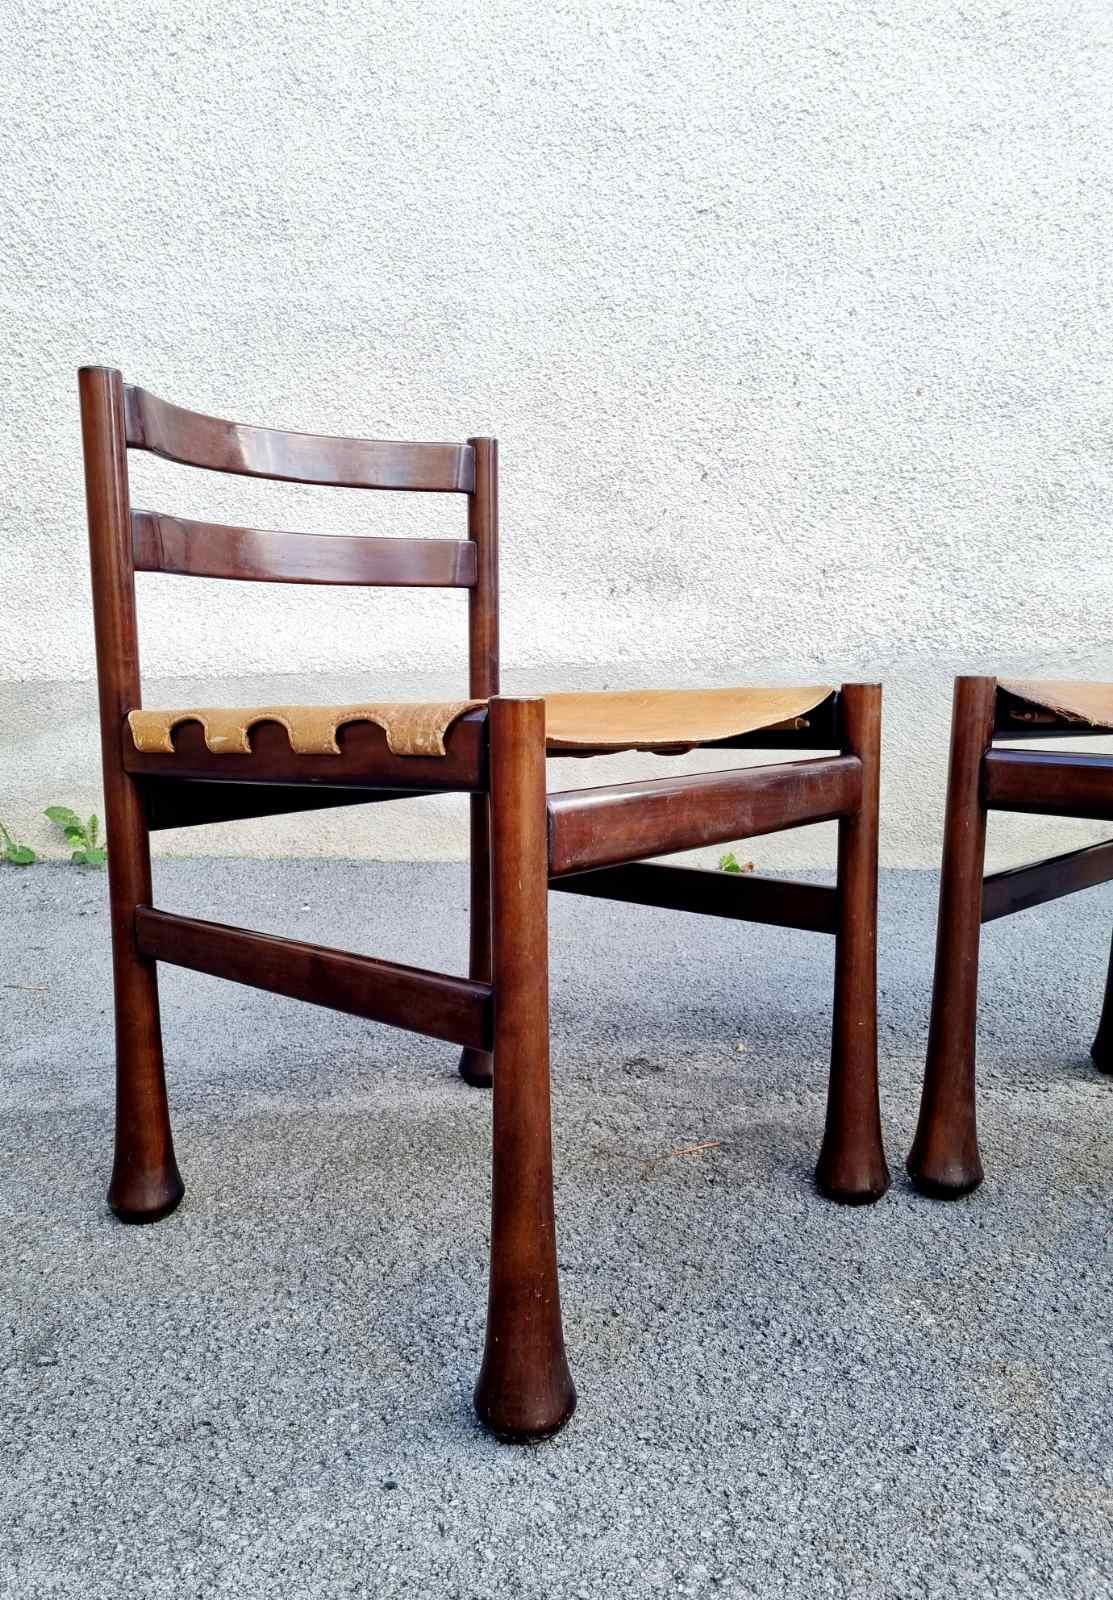 Italian Modern Rosewood and Leather Dining Chairs, Design Luciano Frigerio, 70s For Sale 3